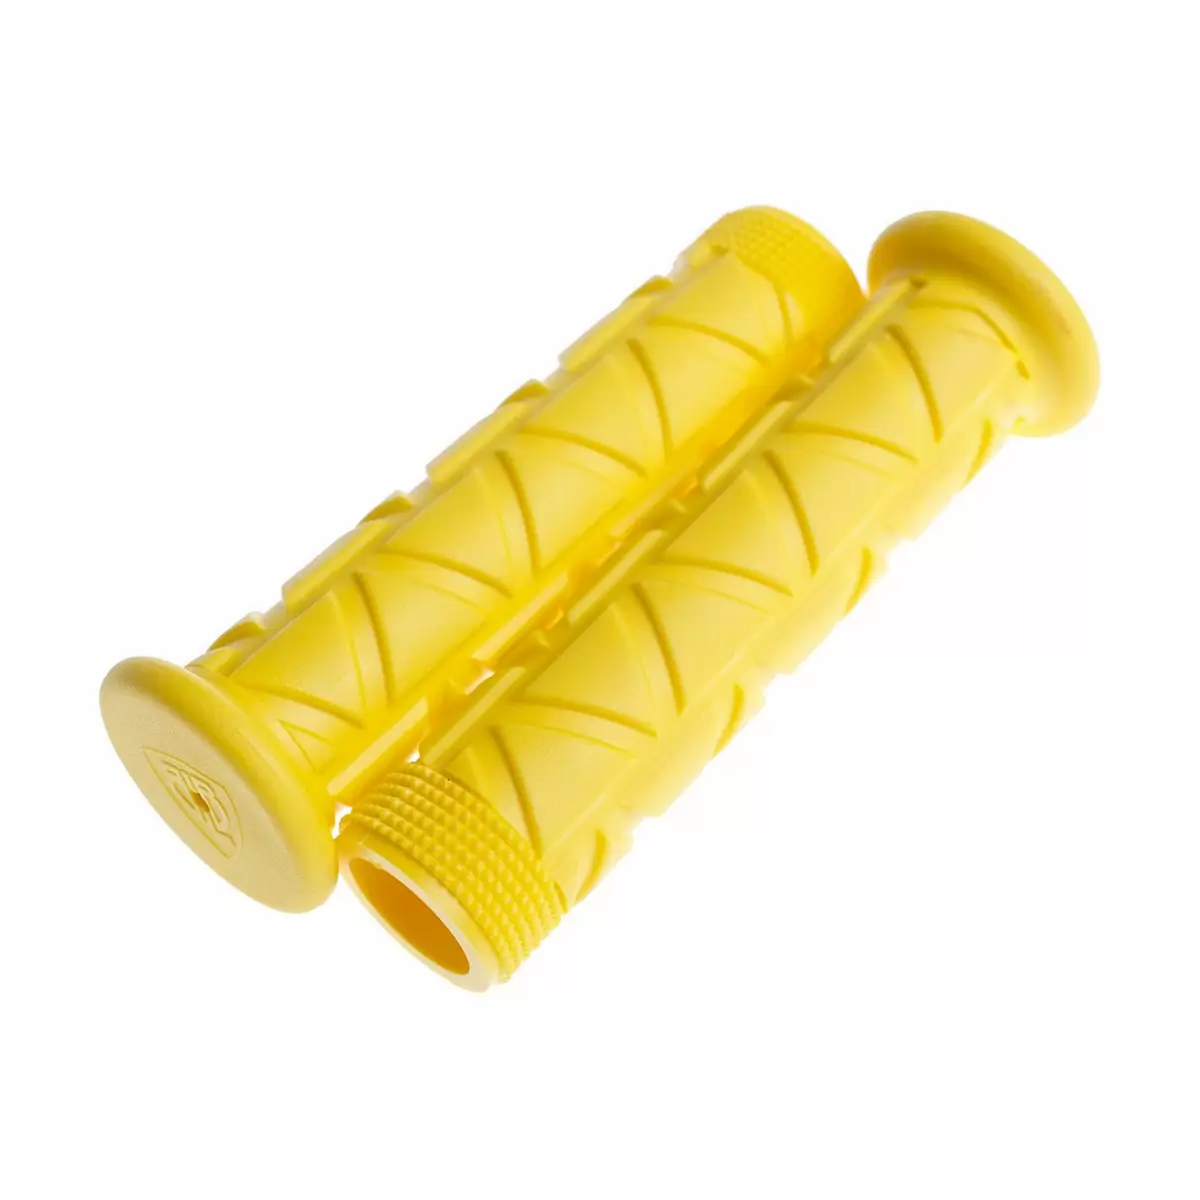 Pair get shorty grips yellow - image